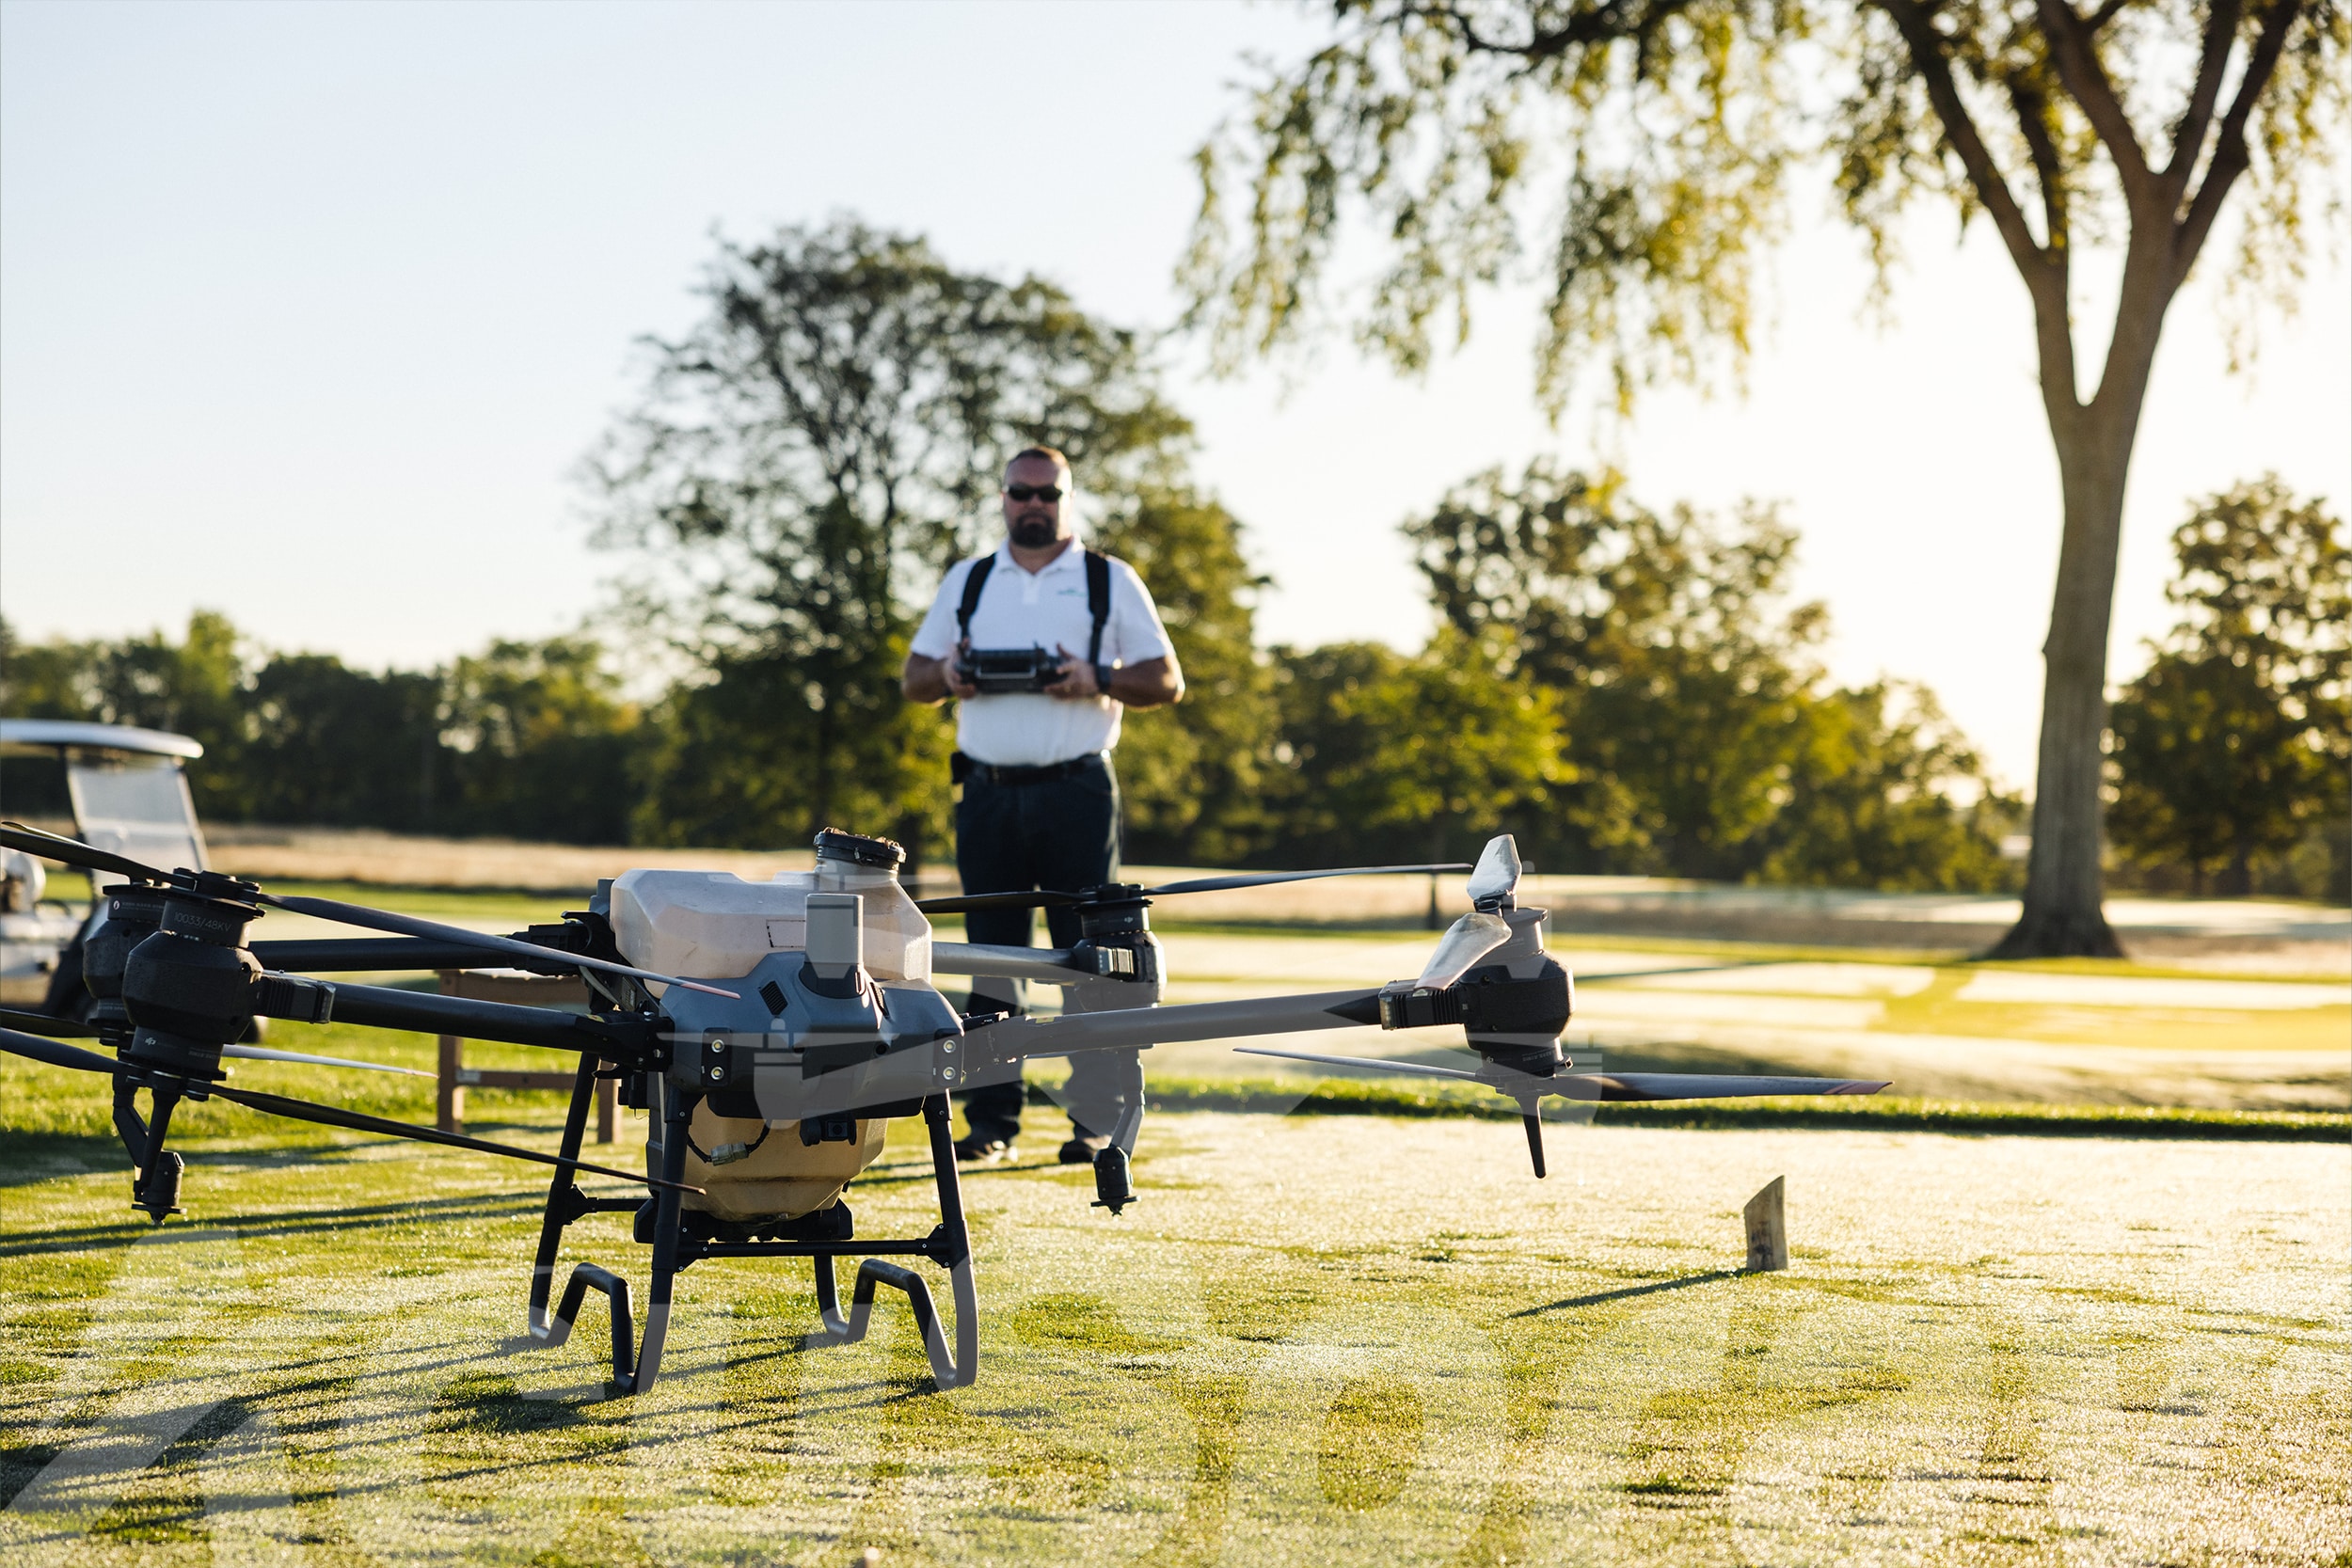 AcuSpray golf course drone service pilot readying drone for takeoff on a tee box.